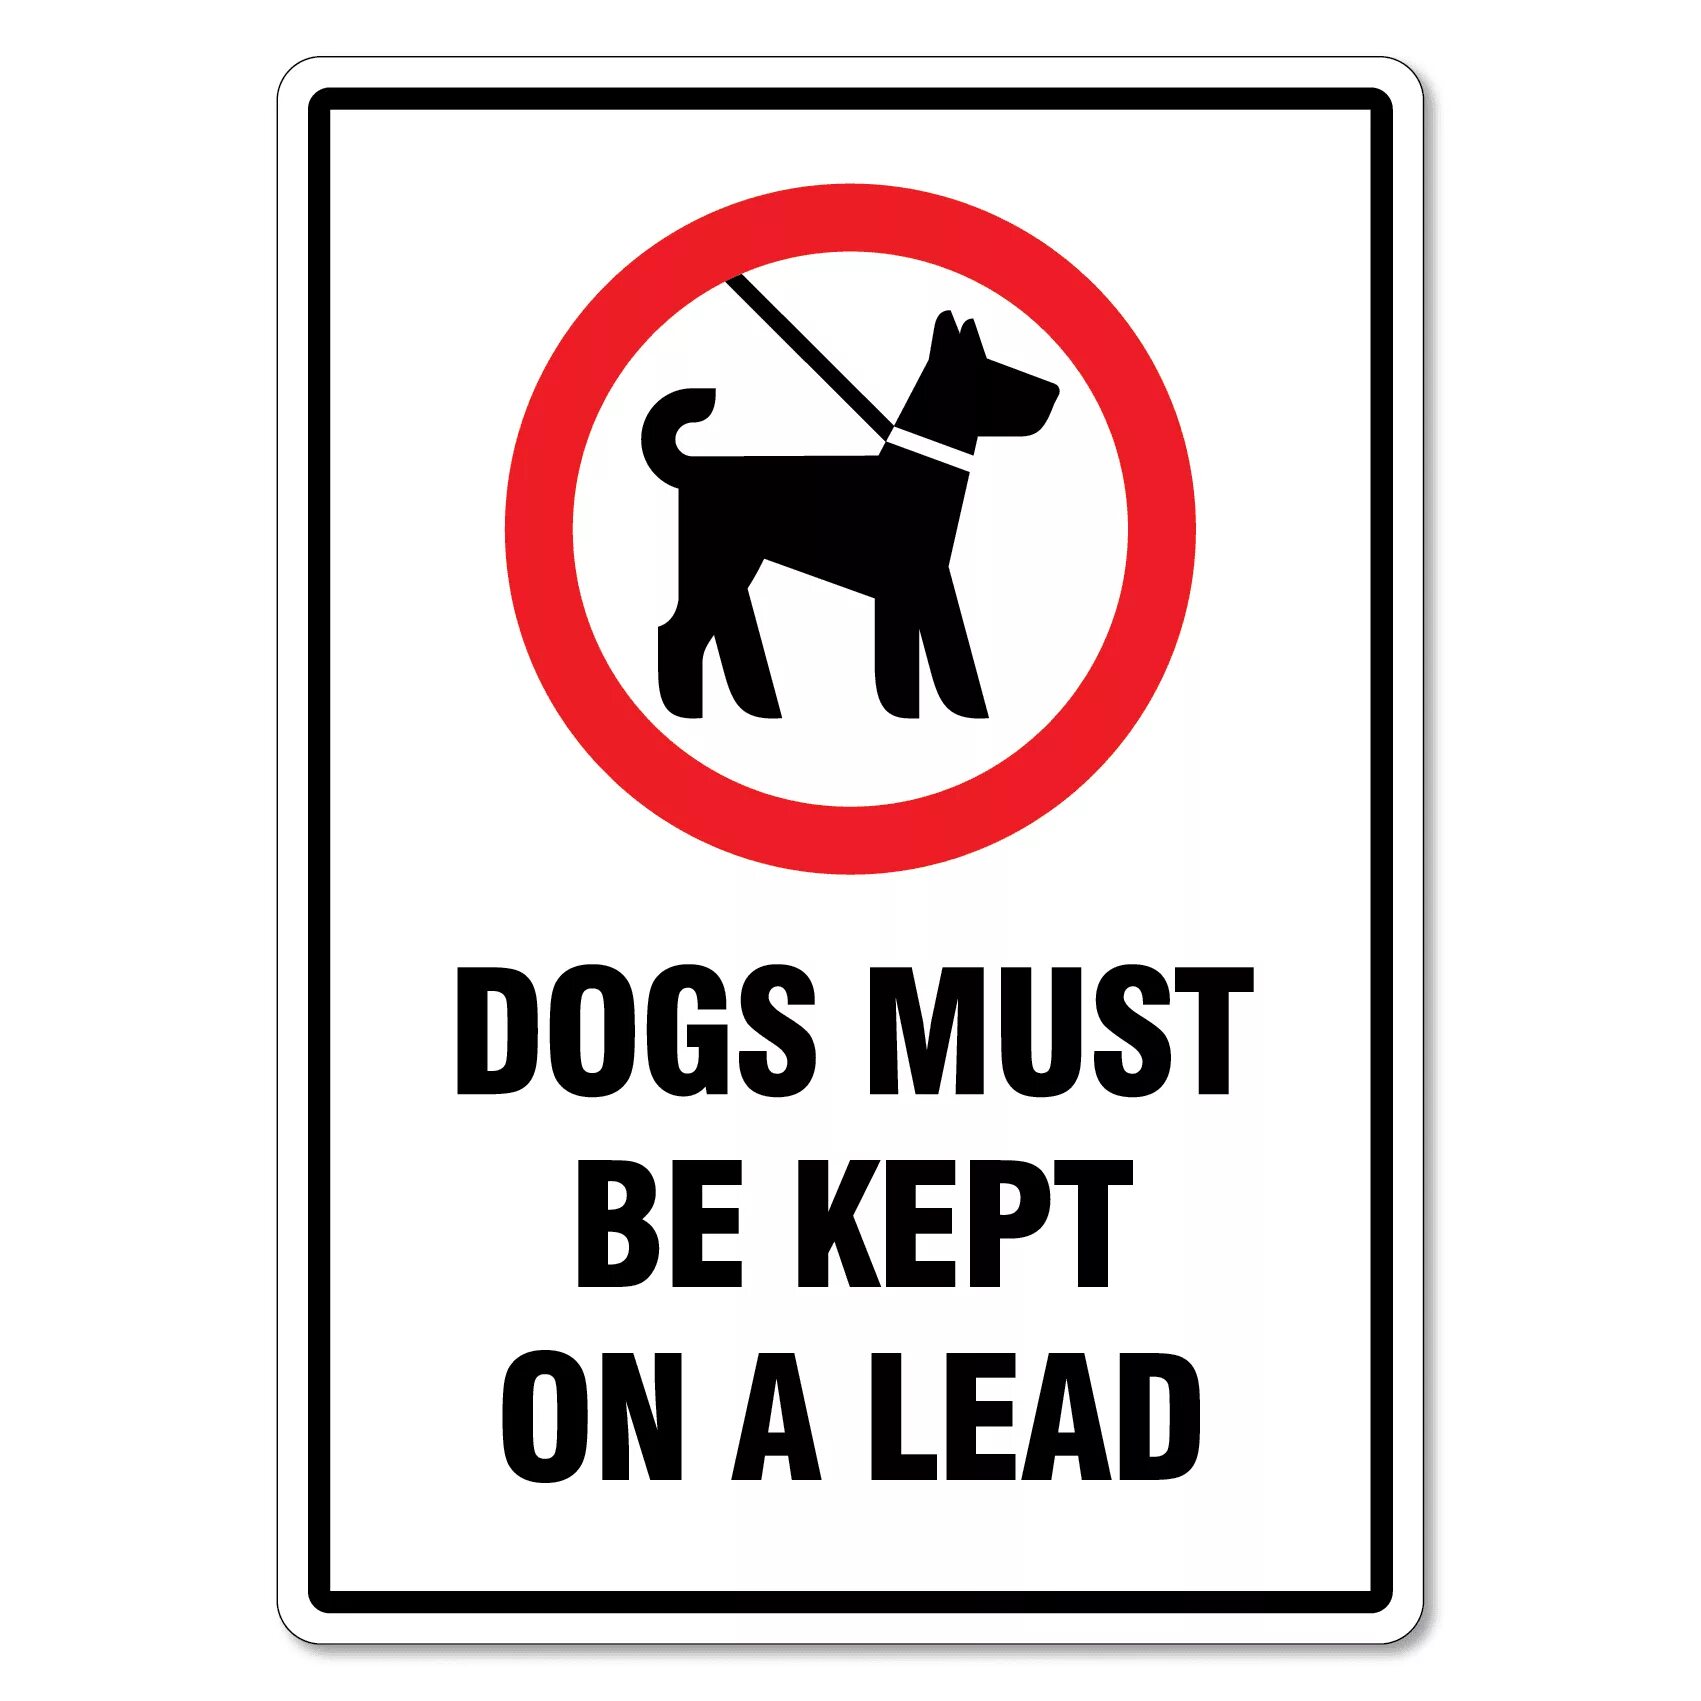 Dogs must keep on a lead. Dogs must be kept on a lead. Знак all Dogs must be on a lead. Dogs must keep on a. Dog sign.